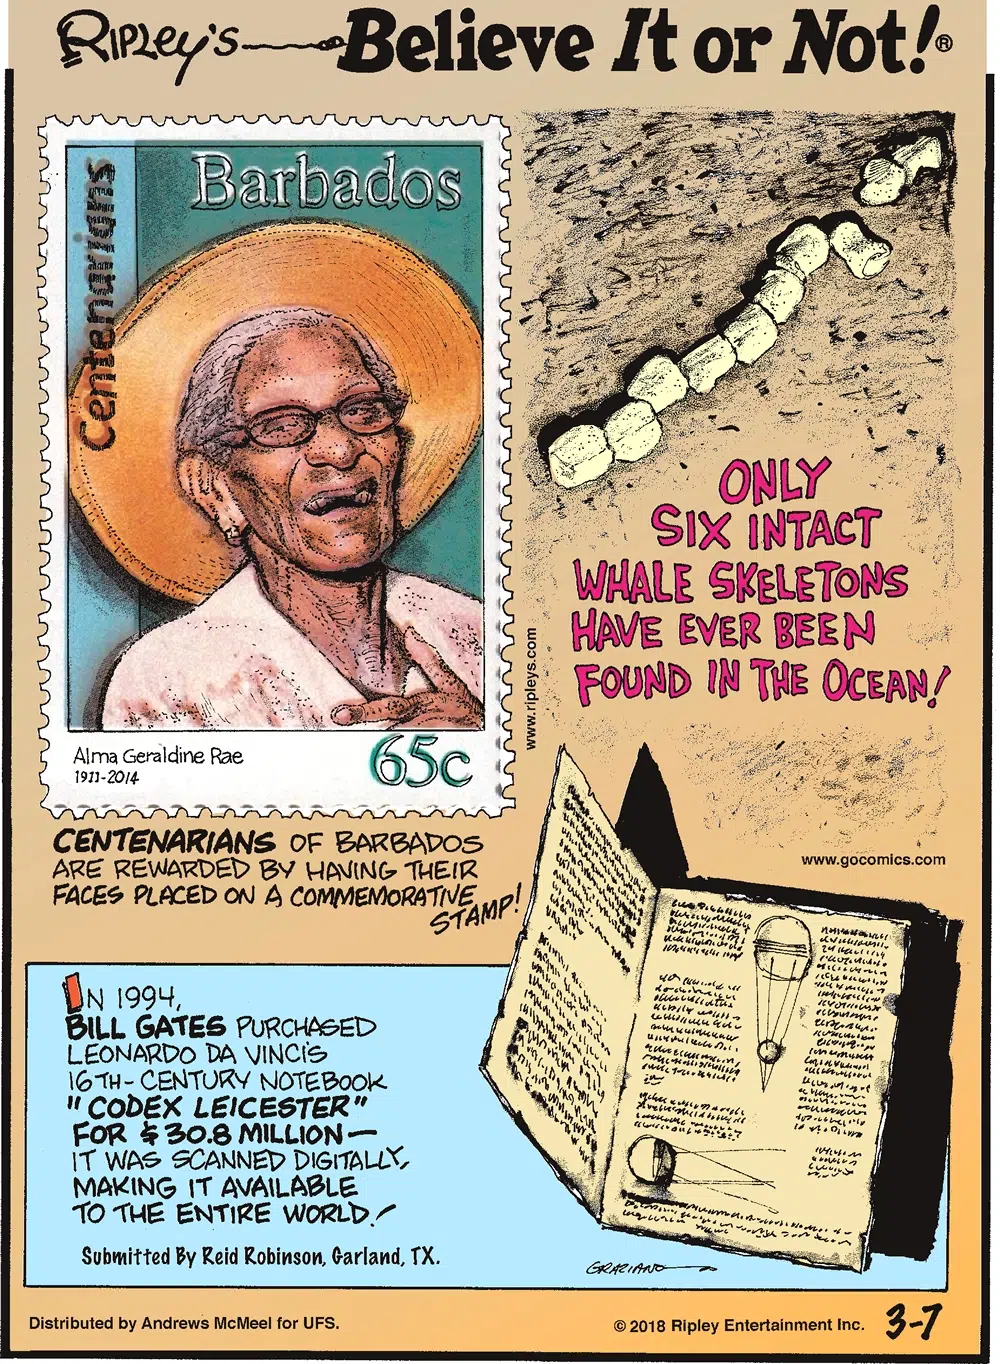 Centenarians of Barbados are rewarded by having their faces placed on a commemorative stamp!-------------------- Only six intact whale skeletons have ever been found in the ocean!-------------------- In 1994, Bill Gates purchased Leonardo Da Vinci's 16th-century notebook "Codex Leicester" for $30.8 million - it was scanned digitally, making it available to the entire world! Submitted by Reid Robinson, Garland, TX.